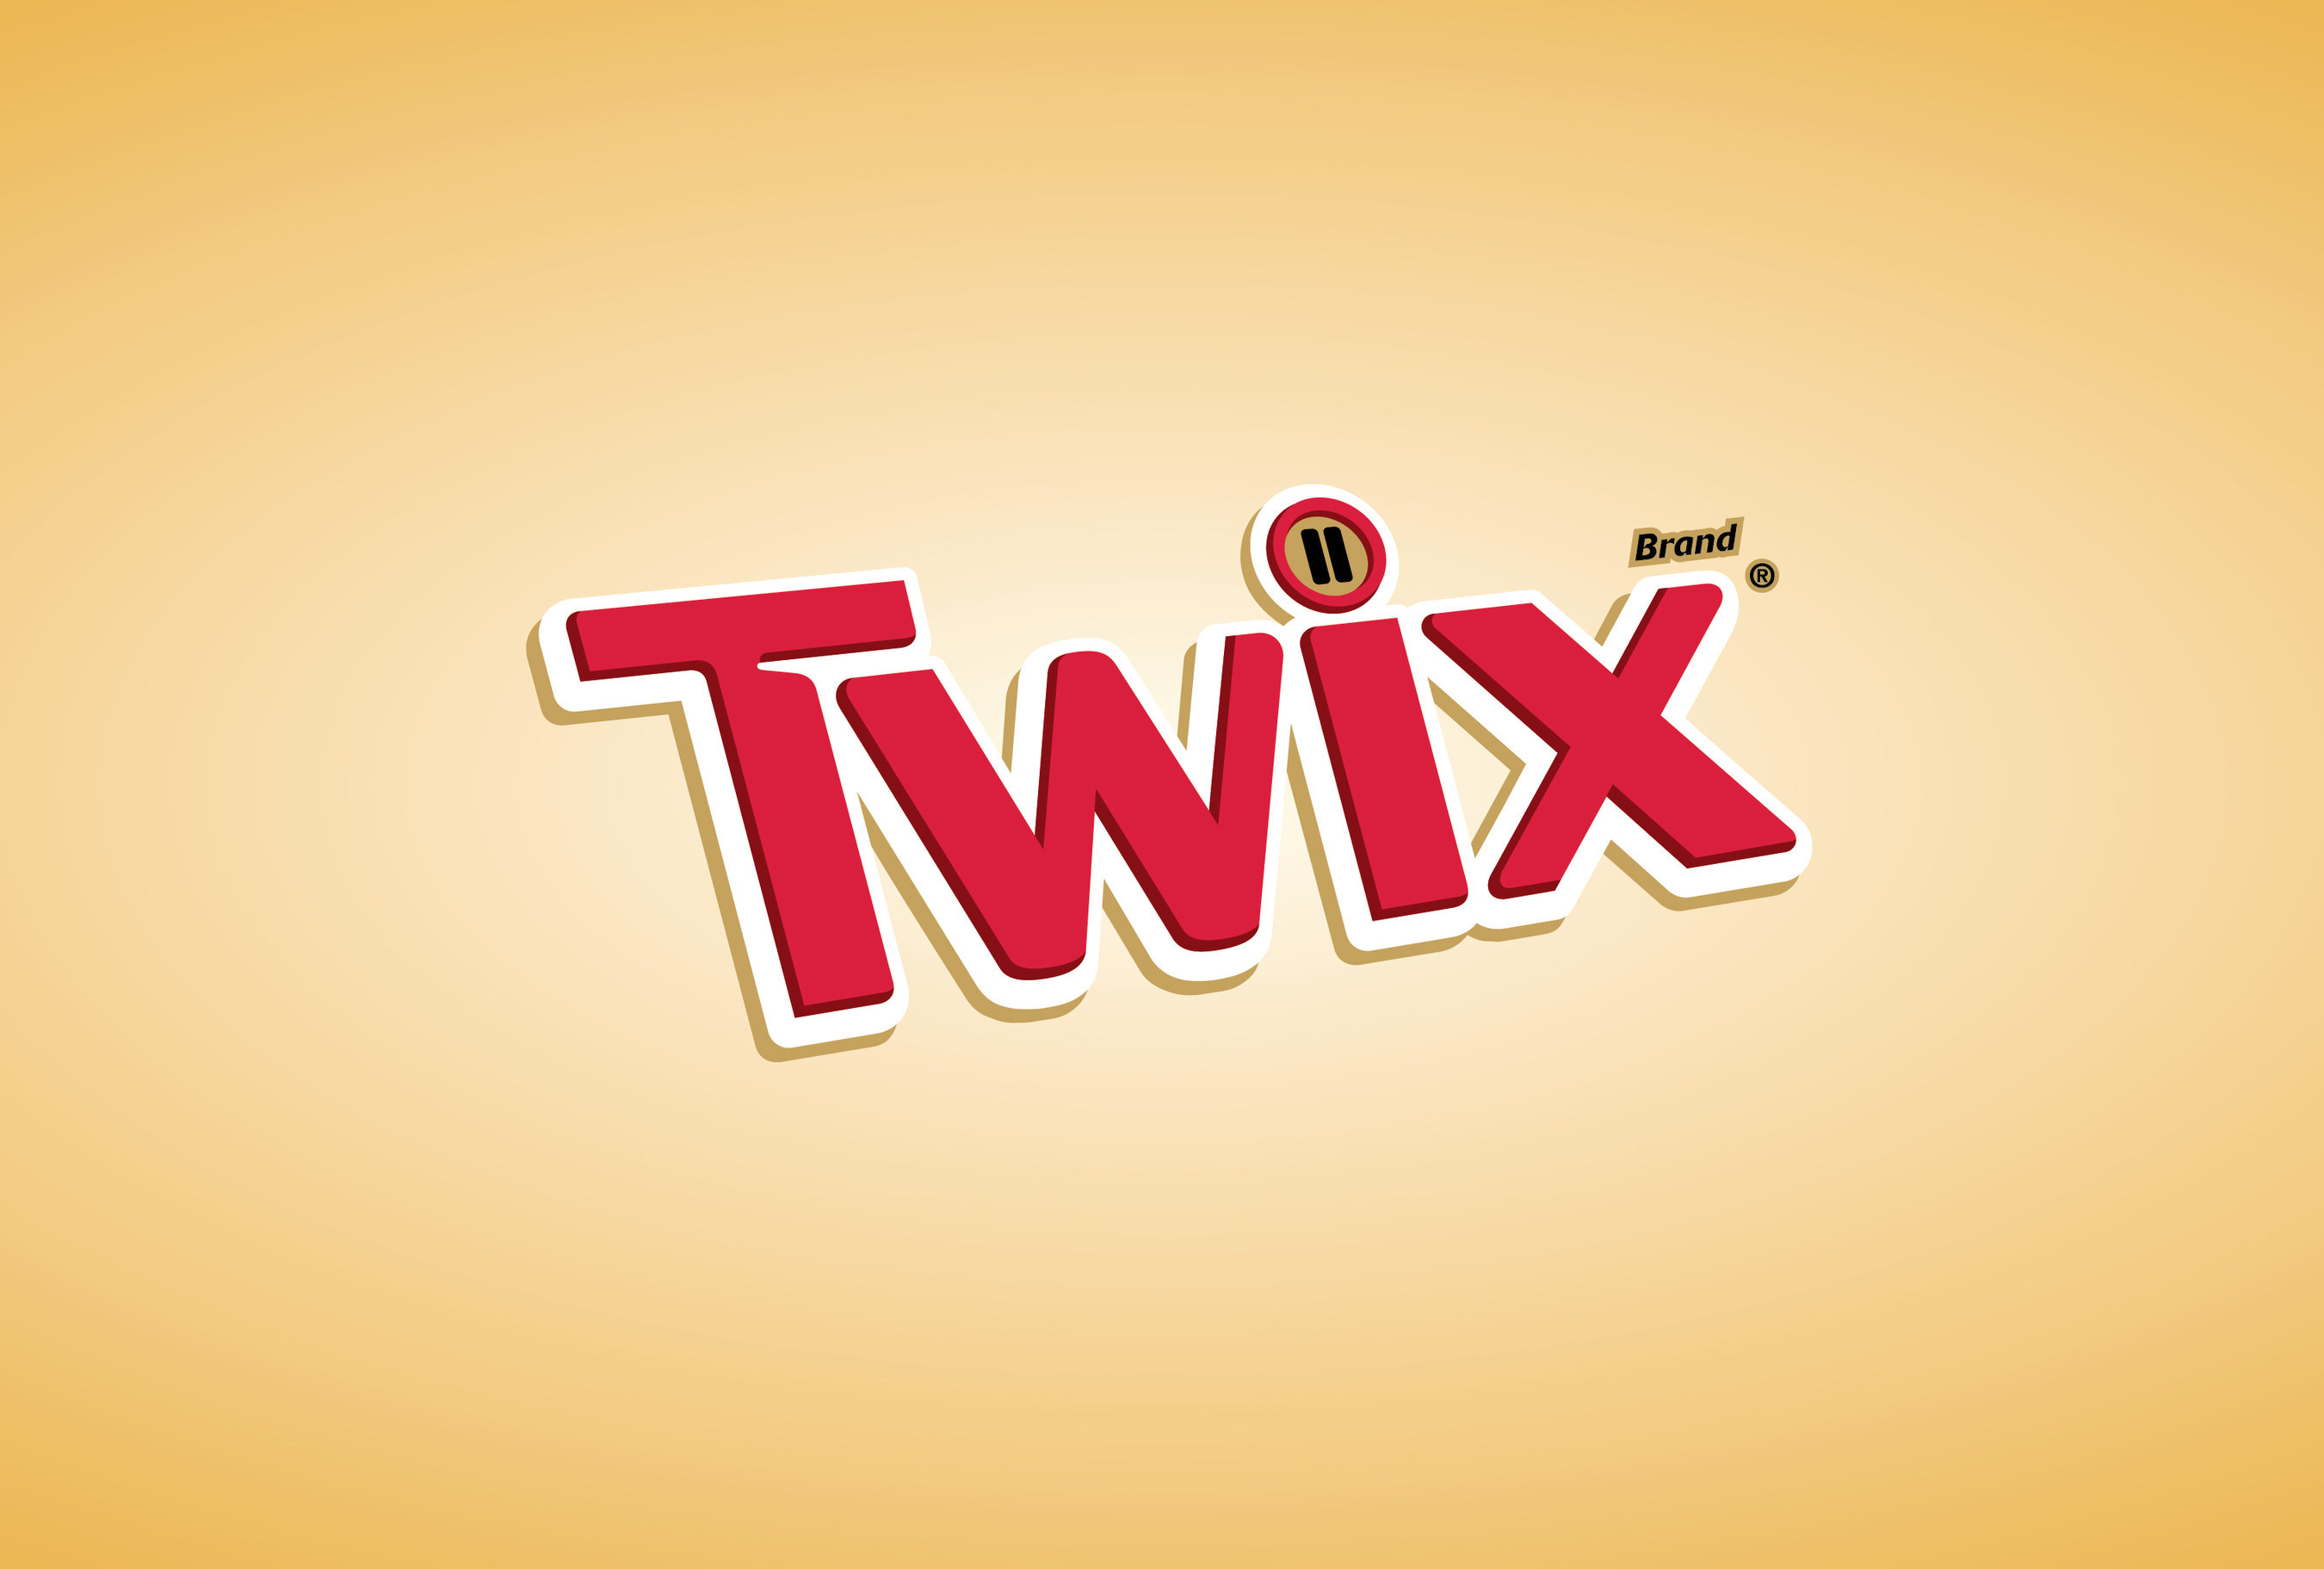 Classic Cookie Bar Meets Even More Chocolate in New TWIX® Triple